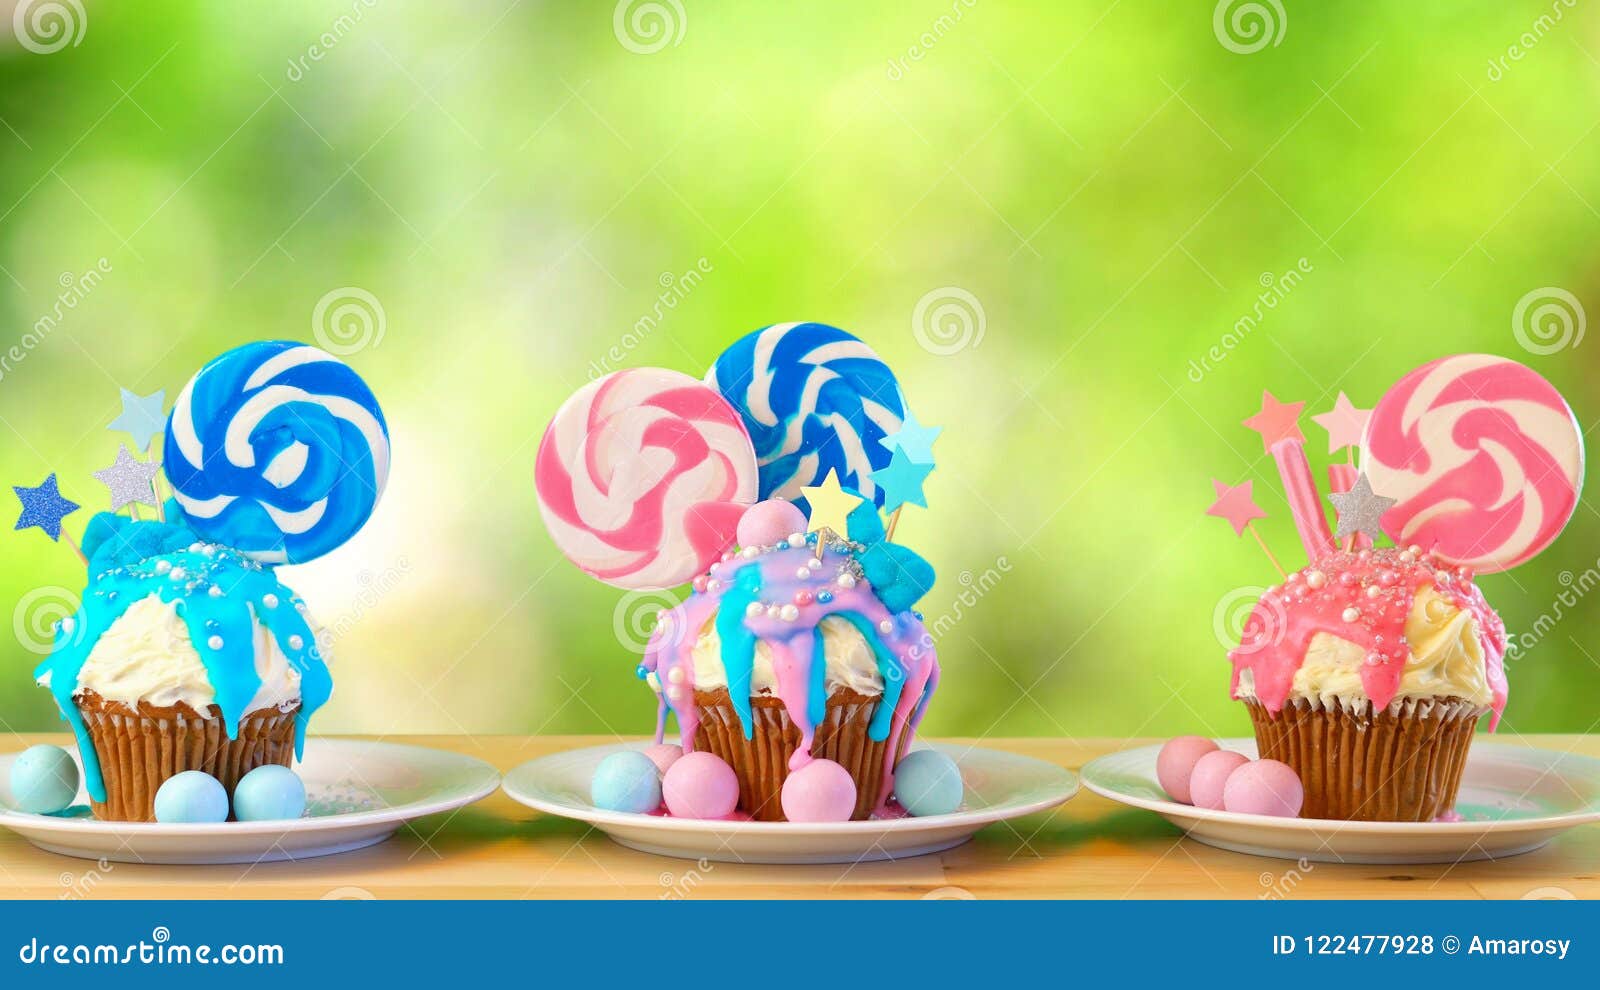 pink and blue novelty cupcakes decorated with lollipop against garden background